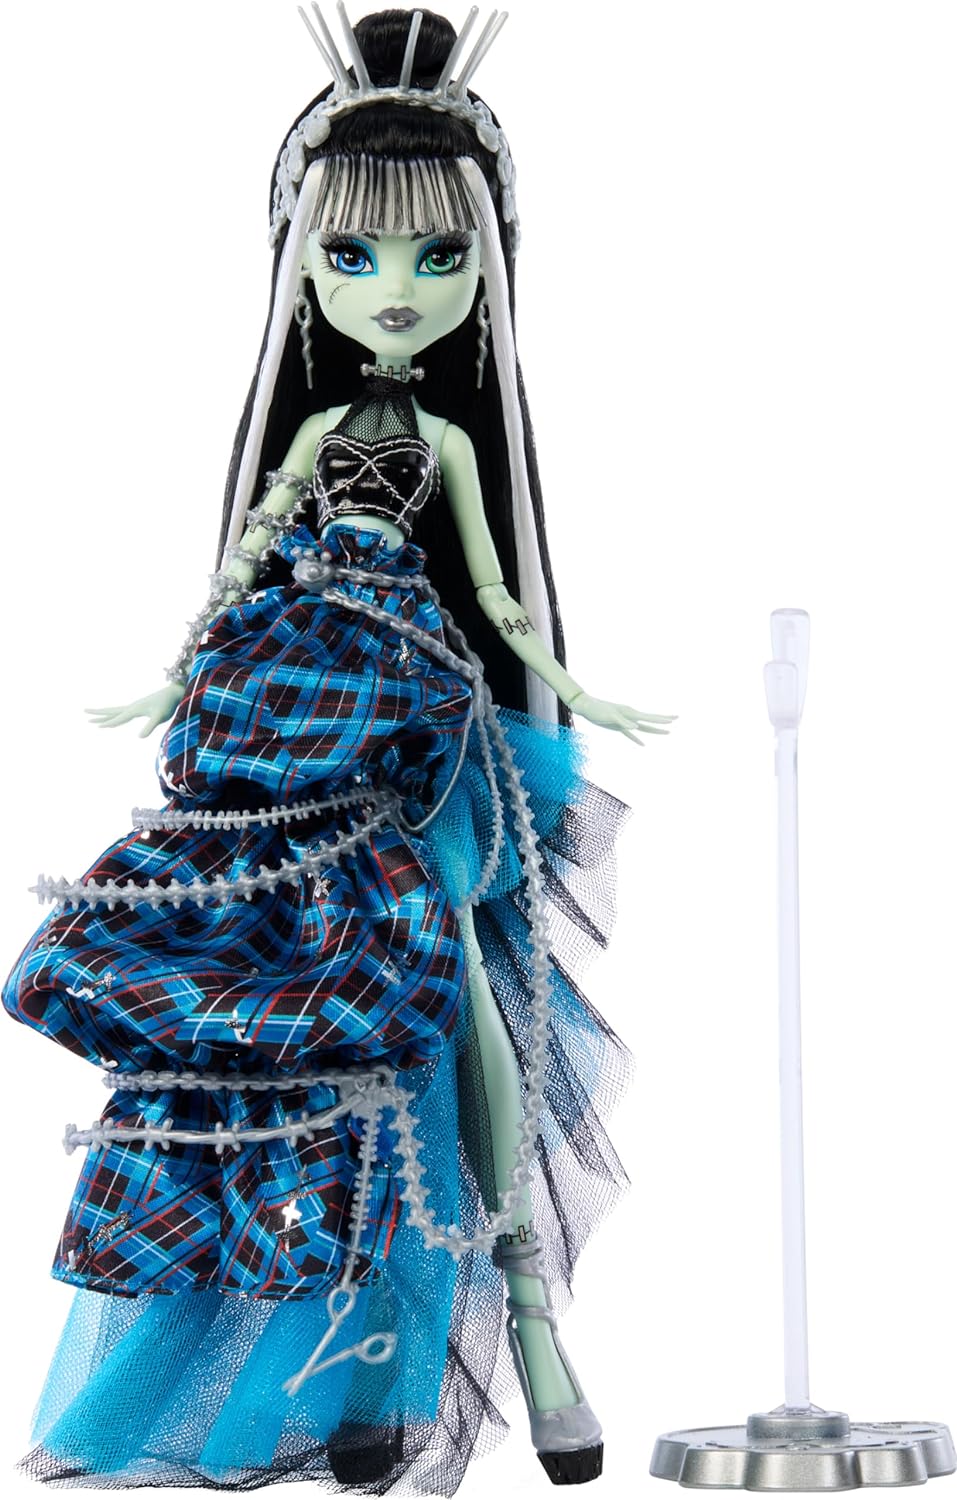 Monster High Doll, Frankie Stein Stitched in Style Fashion Collectible, Blue Plaid Couture Gown & Sewing-Inspired Accessories